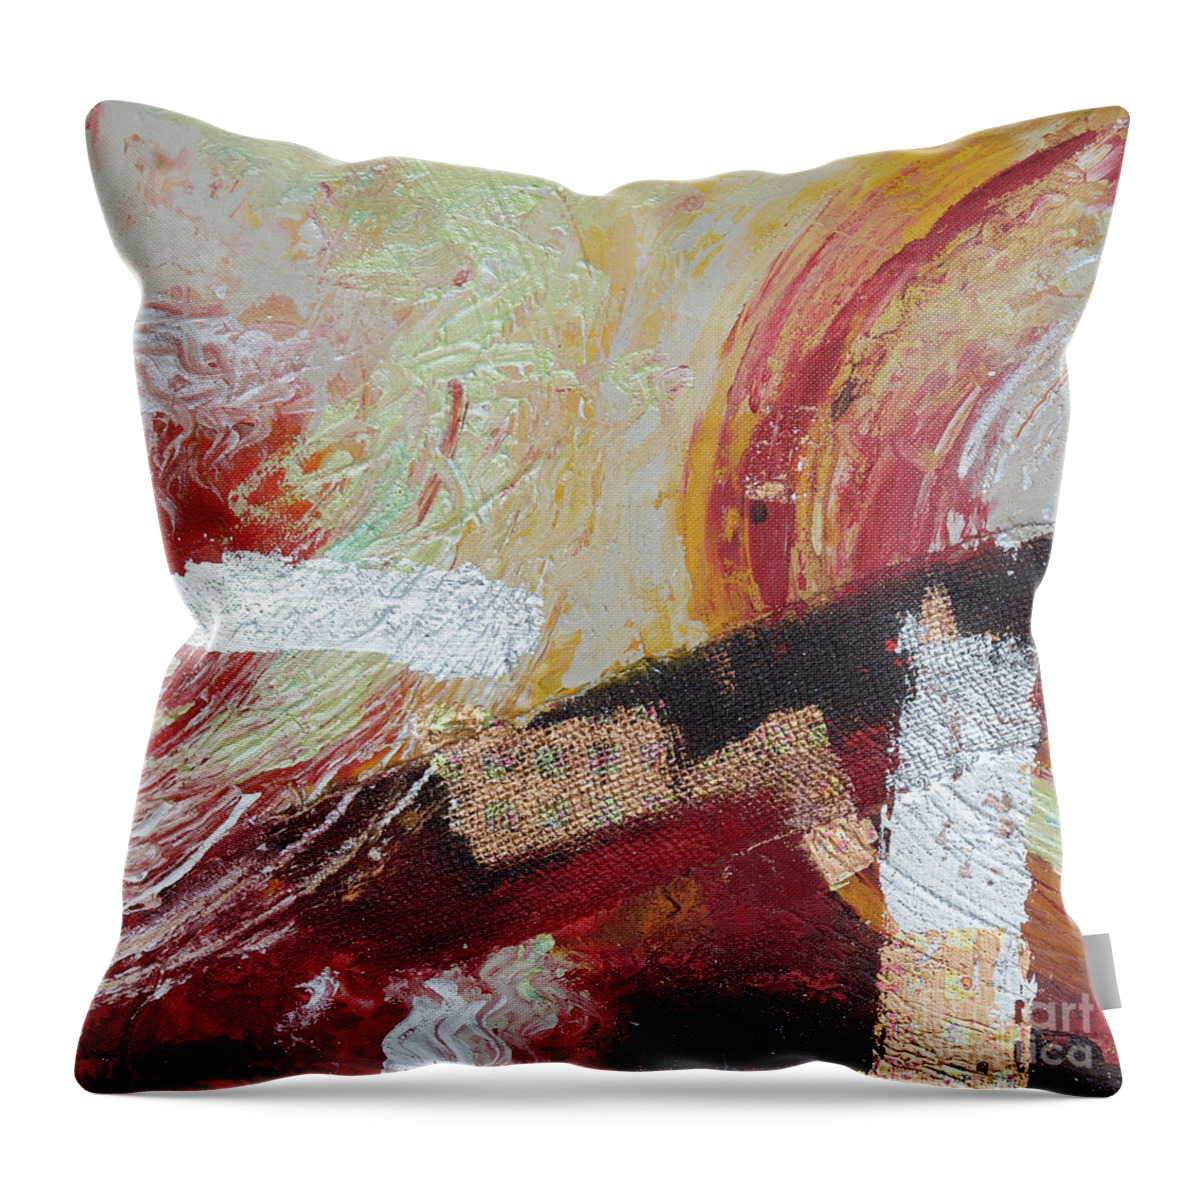 Abstract Throw Pillow featuring the painting Blazing Savanna 1 by Jyotika Shroff